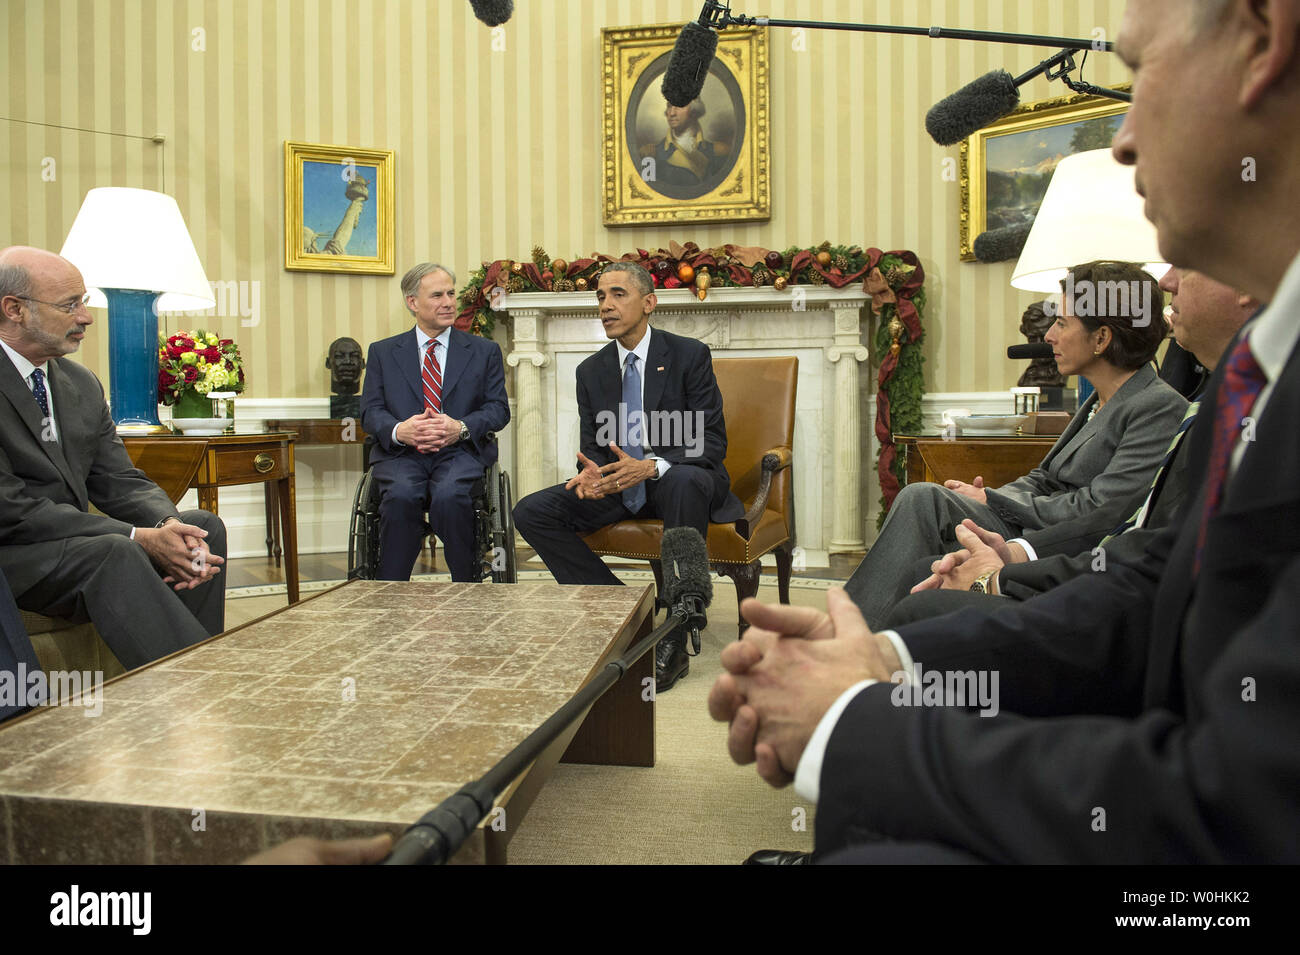 President Barack Obama, seated next to Governor-elect Greg Abbott (R-TX), speaks to reporters as he meets with newly elected governors in the Oval Office of the White House on December 5, 2014. Obama met with Governor-elect Charlie Baker (R-MA), Governor-elect Bruce Rauner (R-IL), Governor-elect Tom Wolf (D-PA), Governor-elect Gina Raimondo (D-RI), Governor-elect Larry Hogan (R-MD) and Gov. Bill Walker (I-AK). UPI/Kevin Dietsch Stock Photo